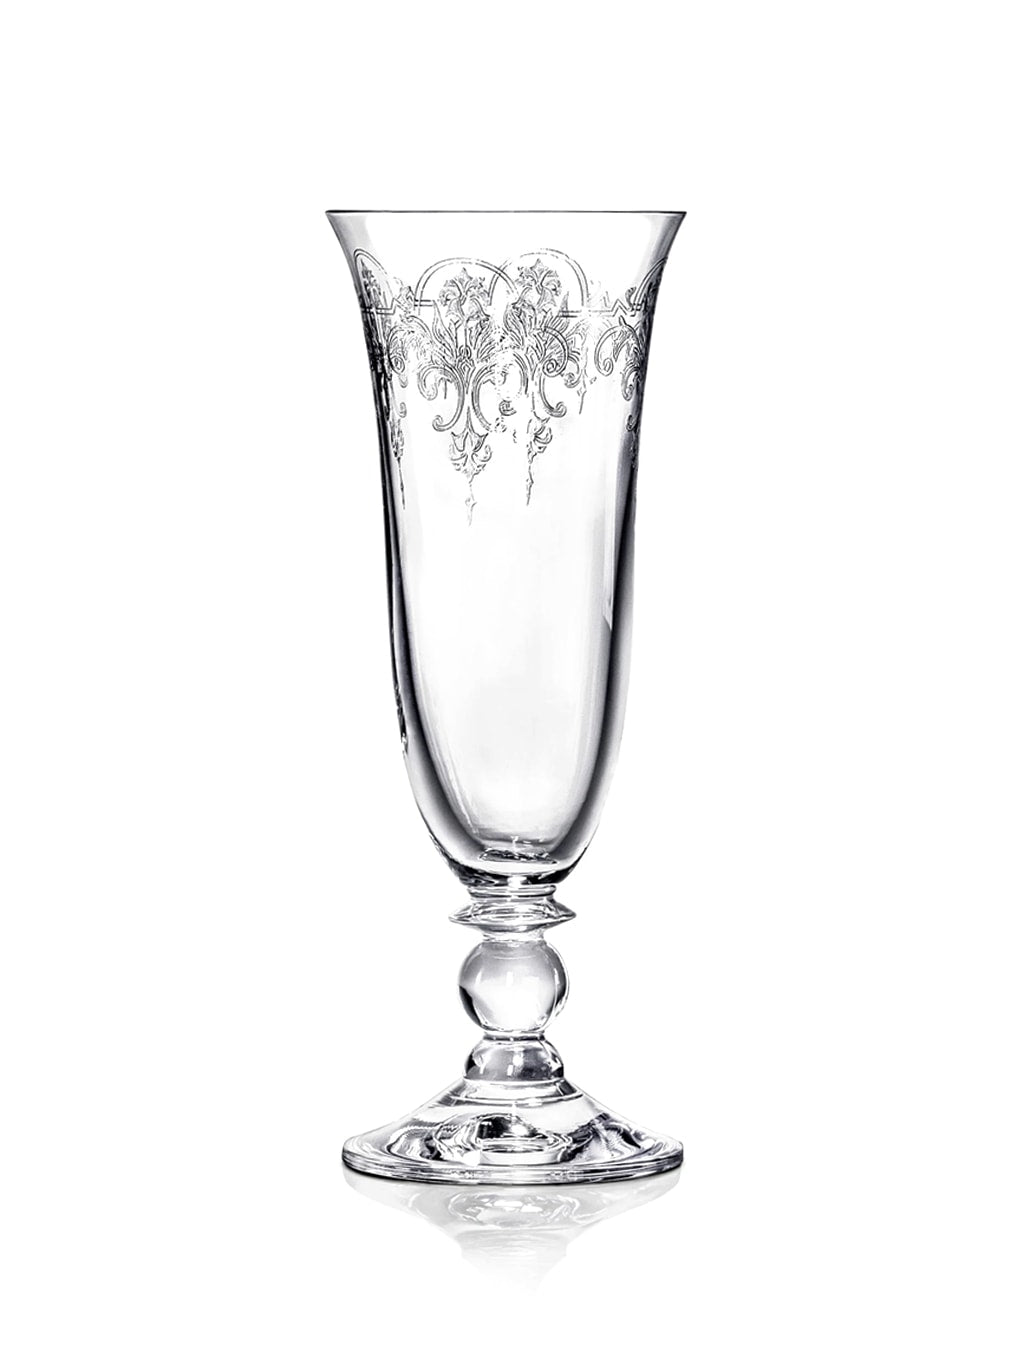 Piano Wine Flute, engraved at the top o the bowl. Part of 6-pieces set.